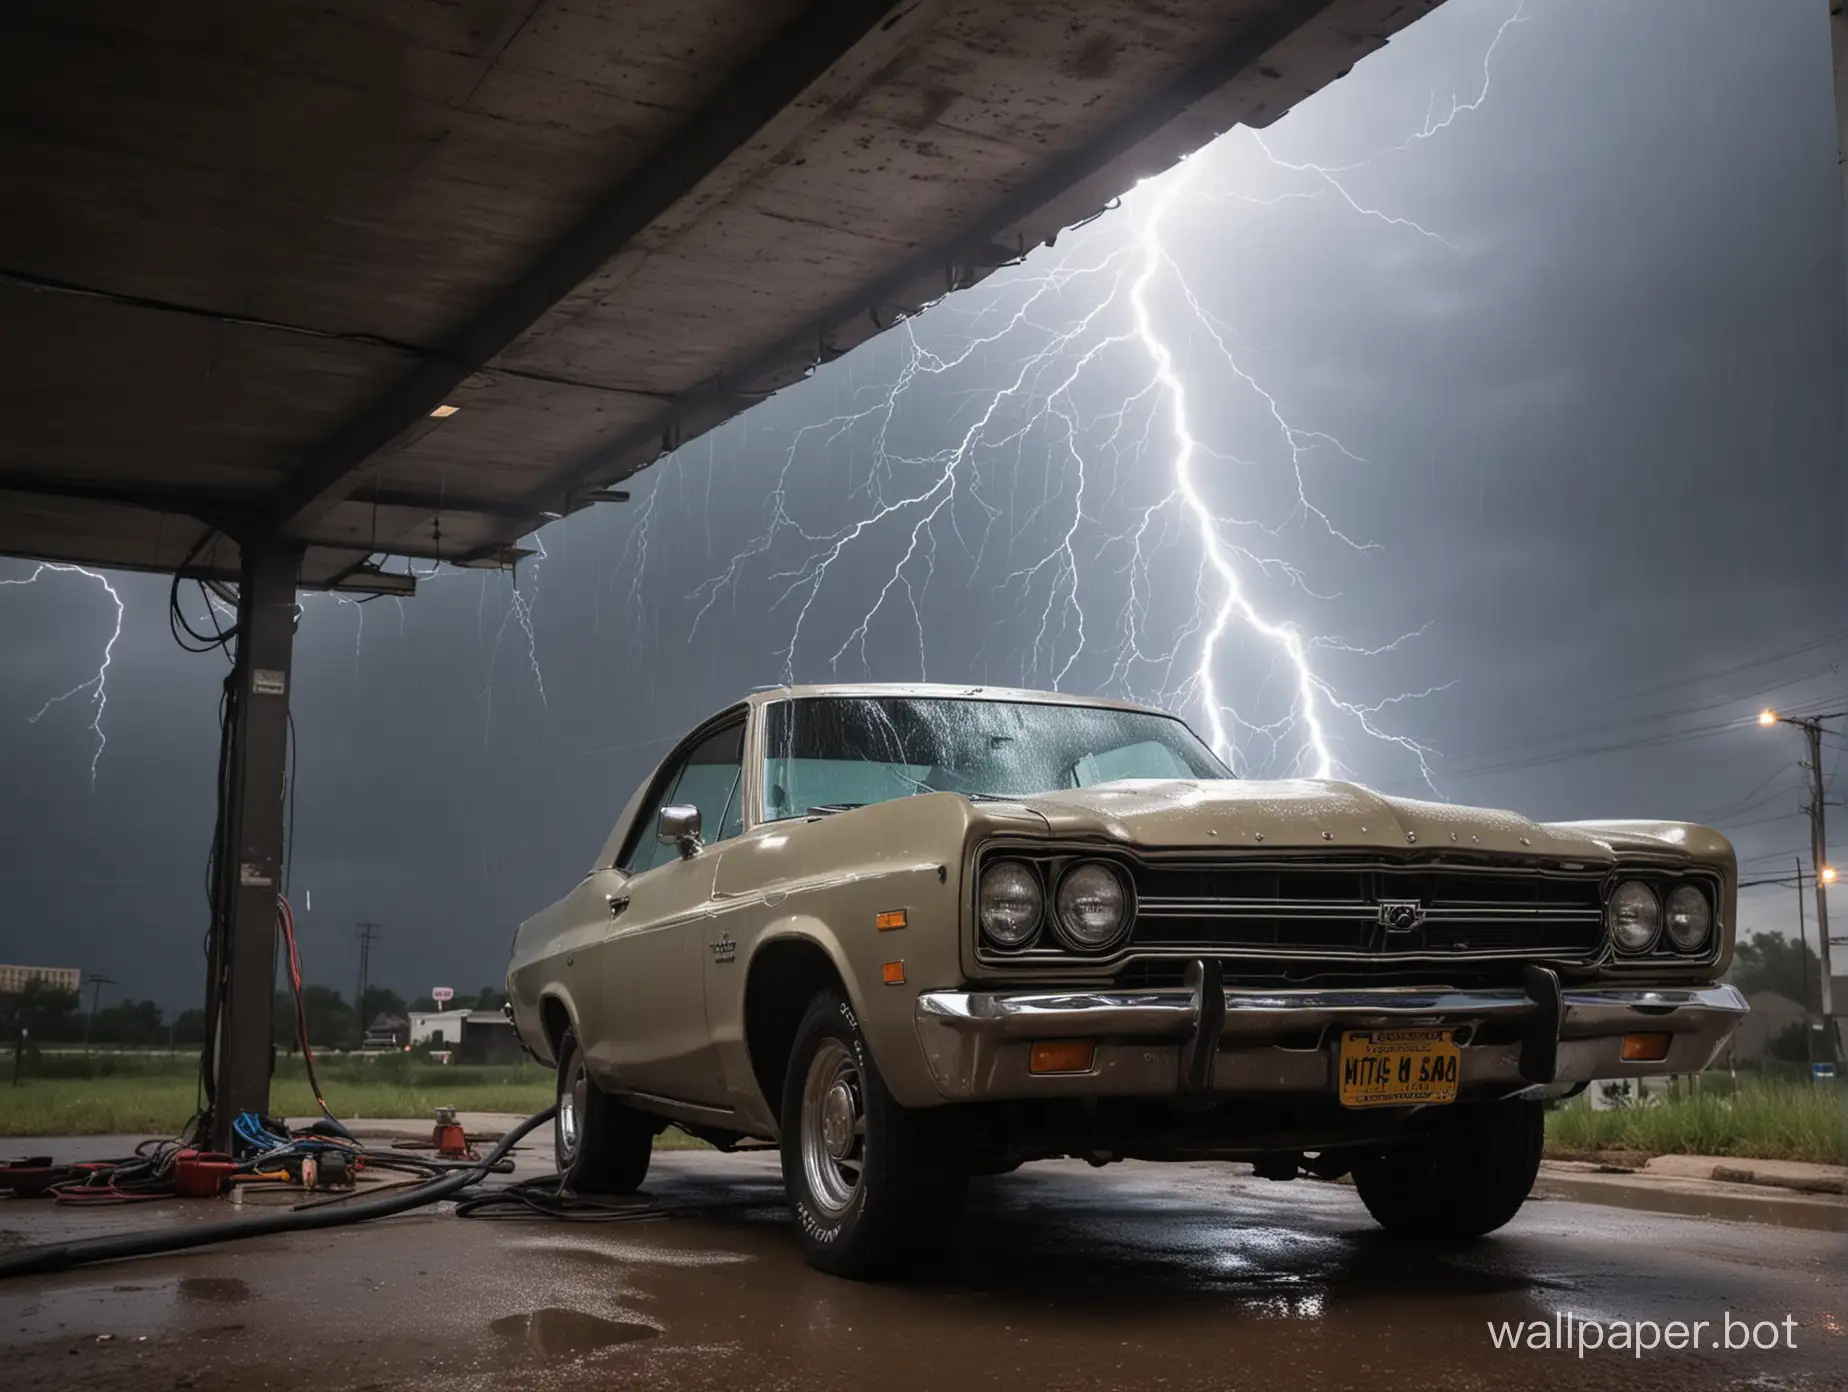 Thunder and electricity fllowing through mechanic